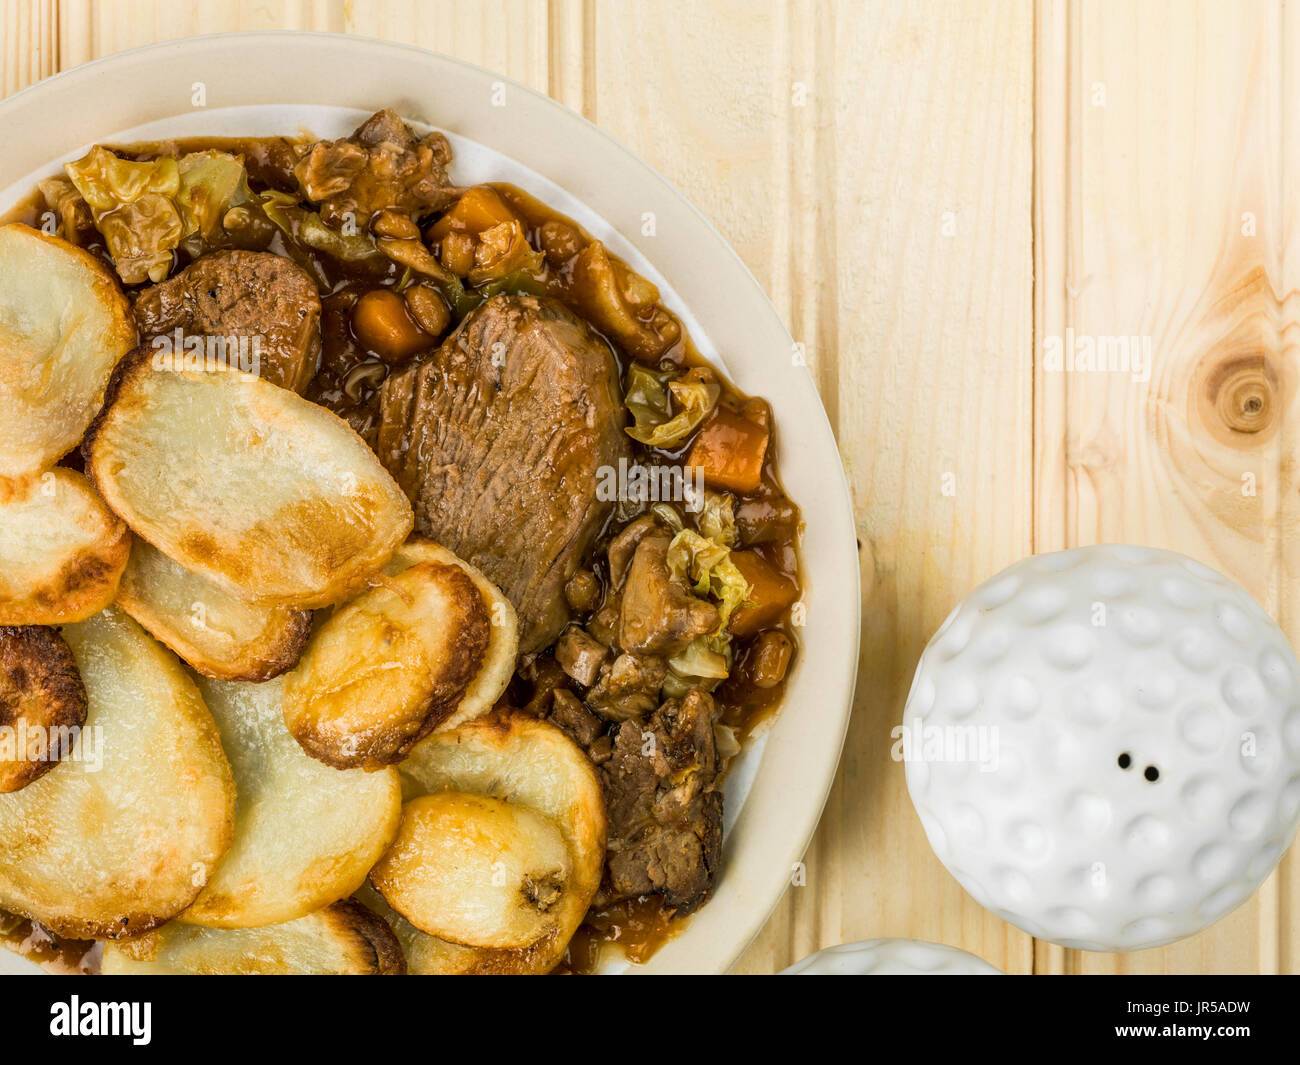 Lamb Hotpot With Sliced Potatoes and Onion Gravy Against a Light Pine Wood Wooden Background Stock Photo